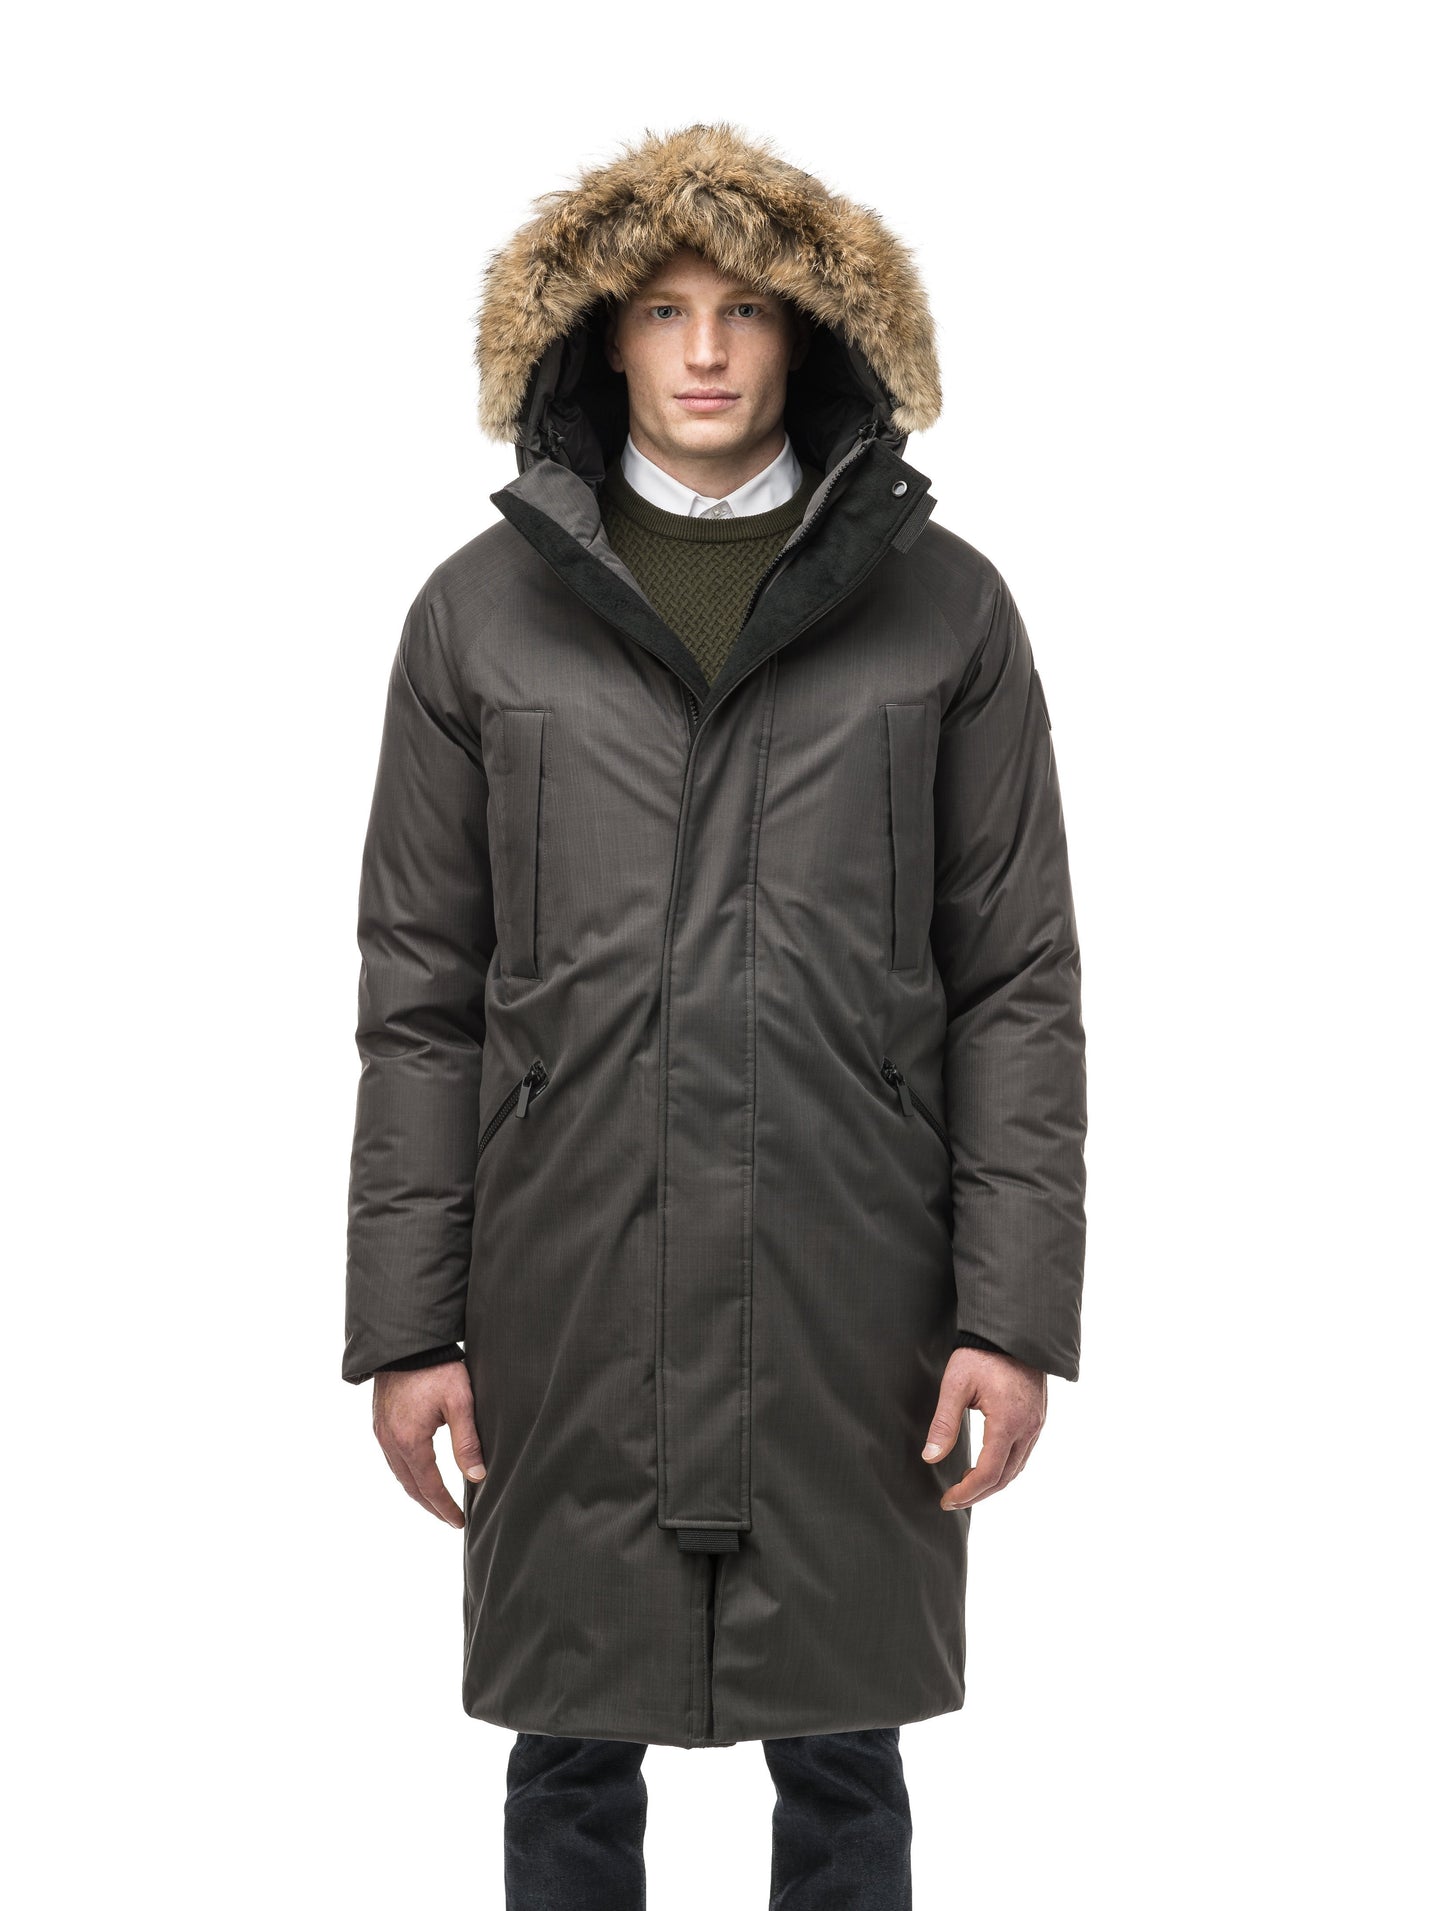 This ankle length men's down filled parka doubles as an over coat with a removable fur trim on the hood in Steel Grey